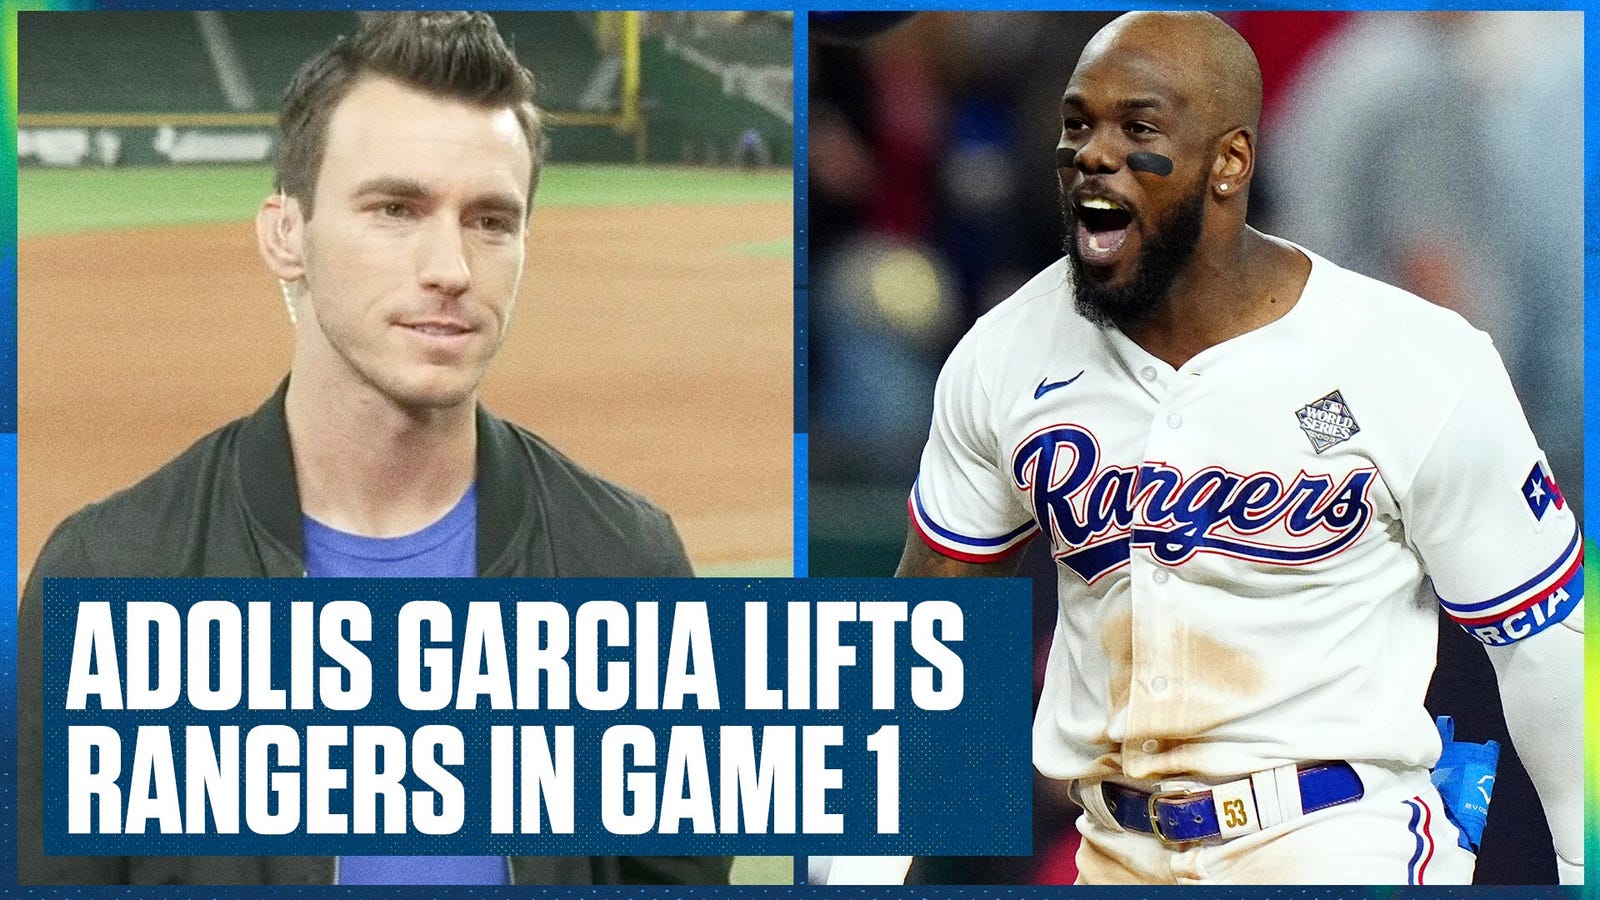 Rangers' Adolis Garcia lifts them to a walk-off win in World Series Game 1